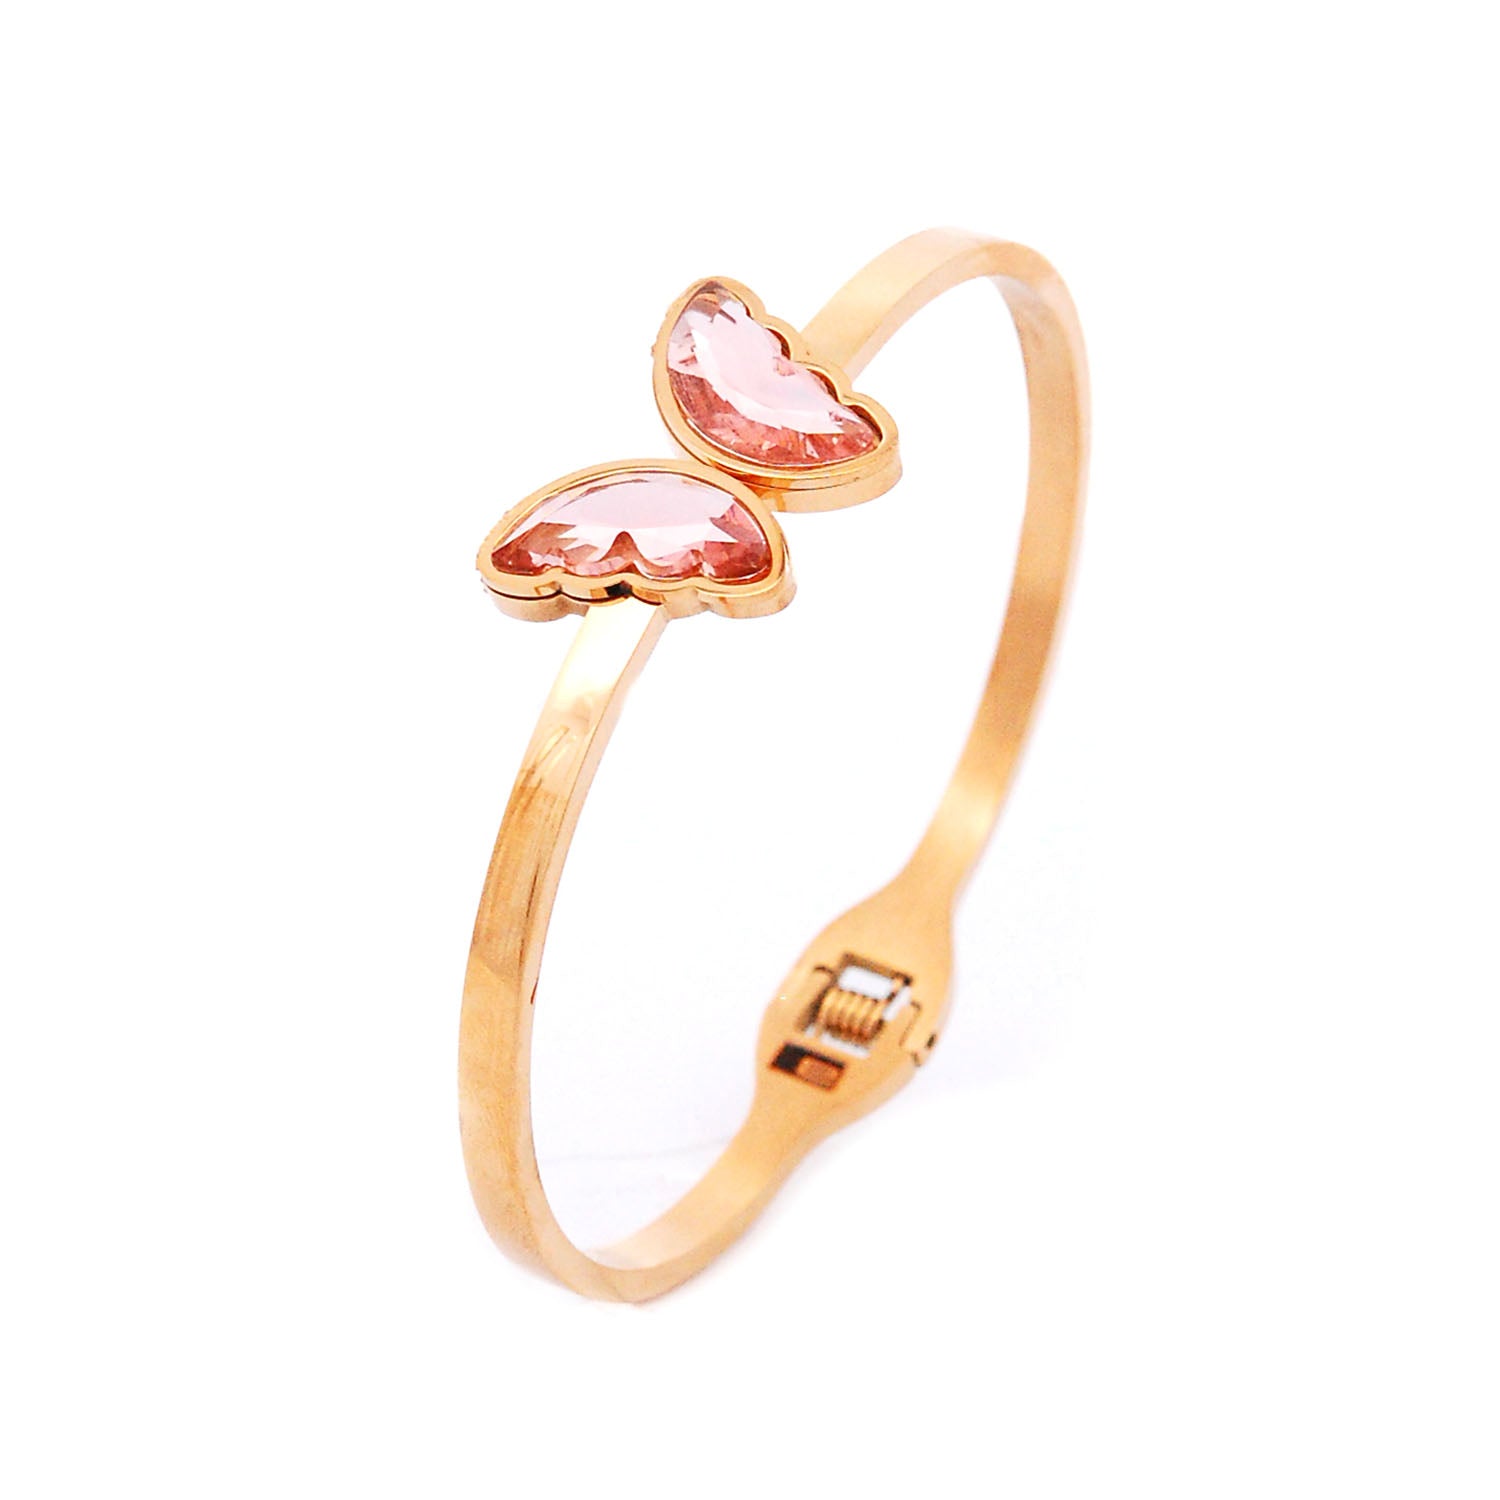 ESBG 7629: Gold-Plated Pink Crystal Butterfly Bangle